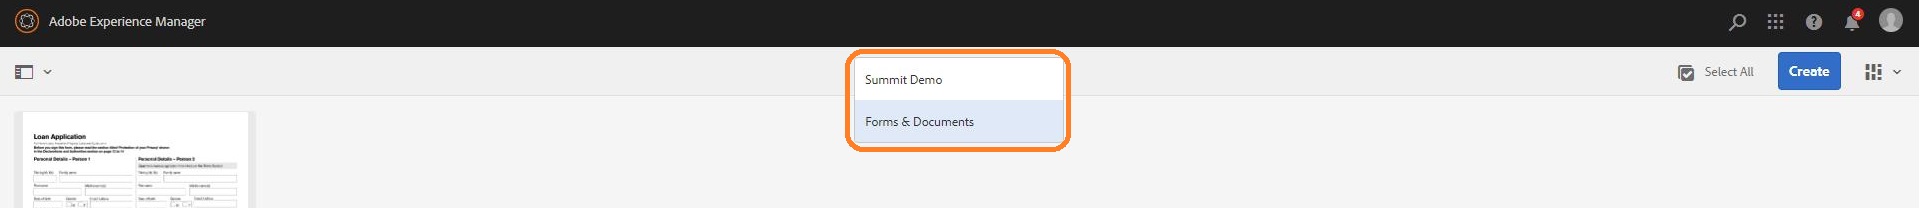 Navigate to Forms & Documents folder